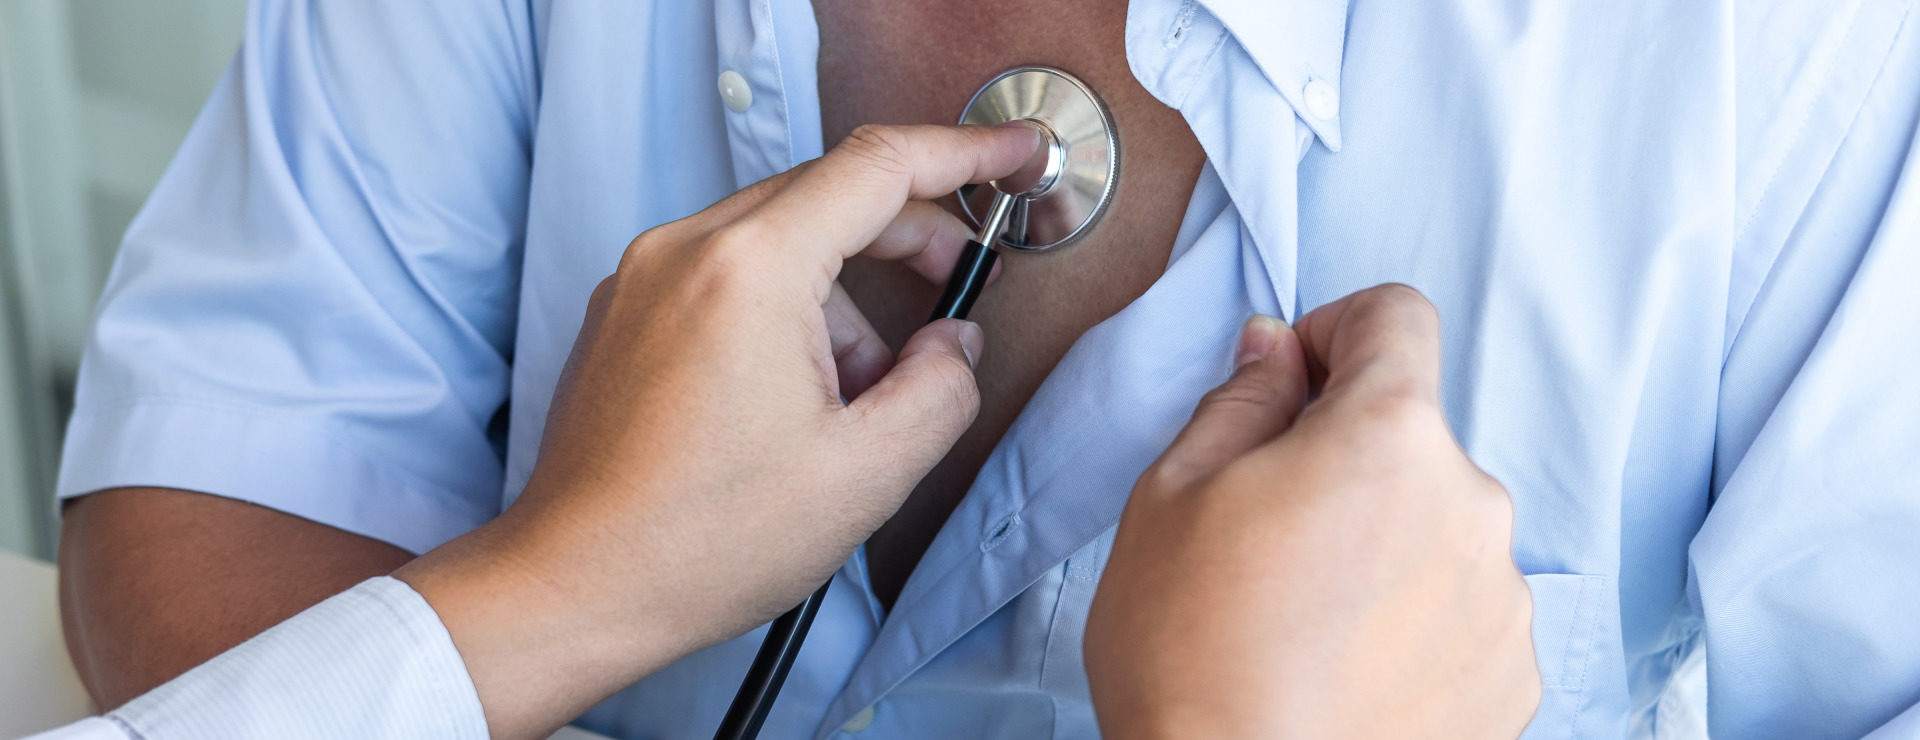 Close up of a consultant checking a patient's heart beat using a stethoscope